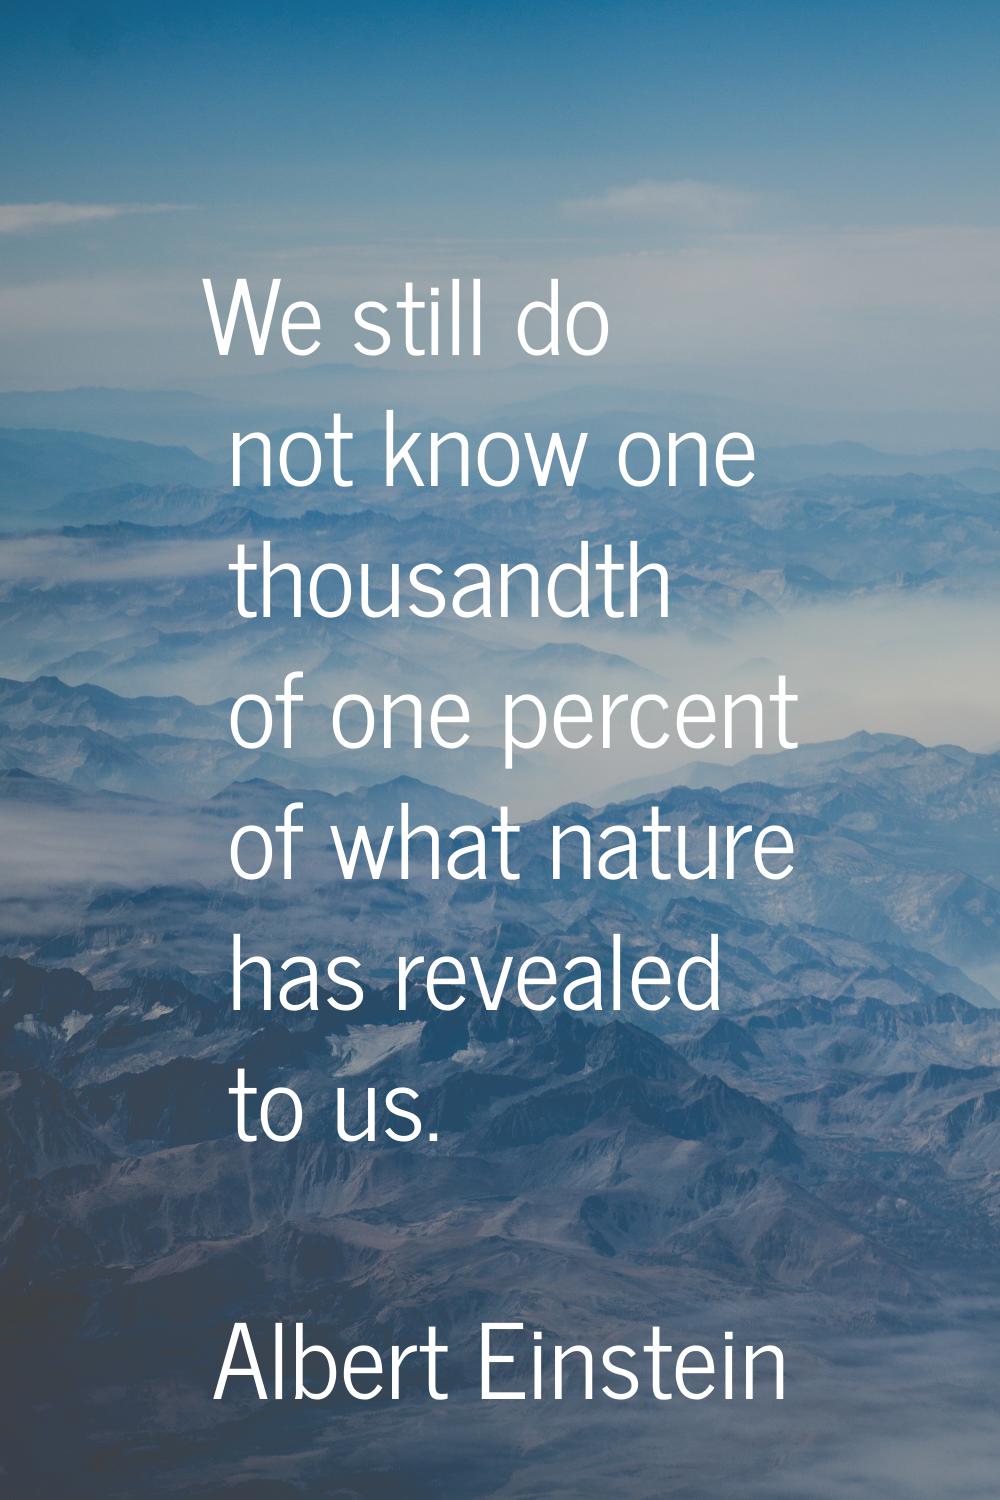 We still do not know one thousandth of one percent of what nature has revealed to us.